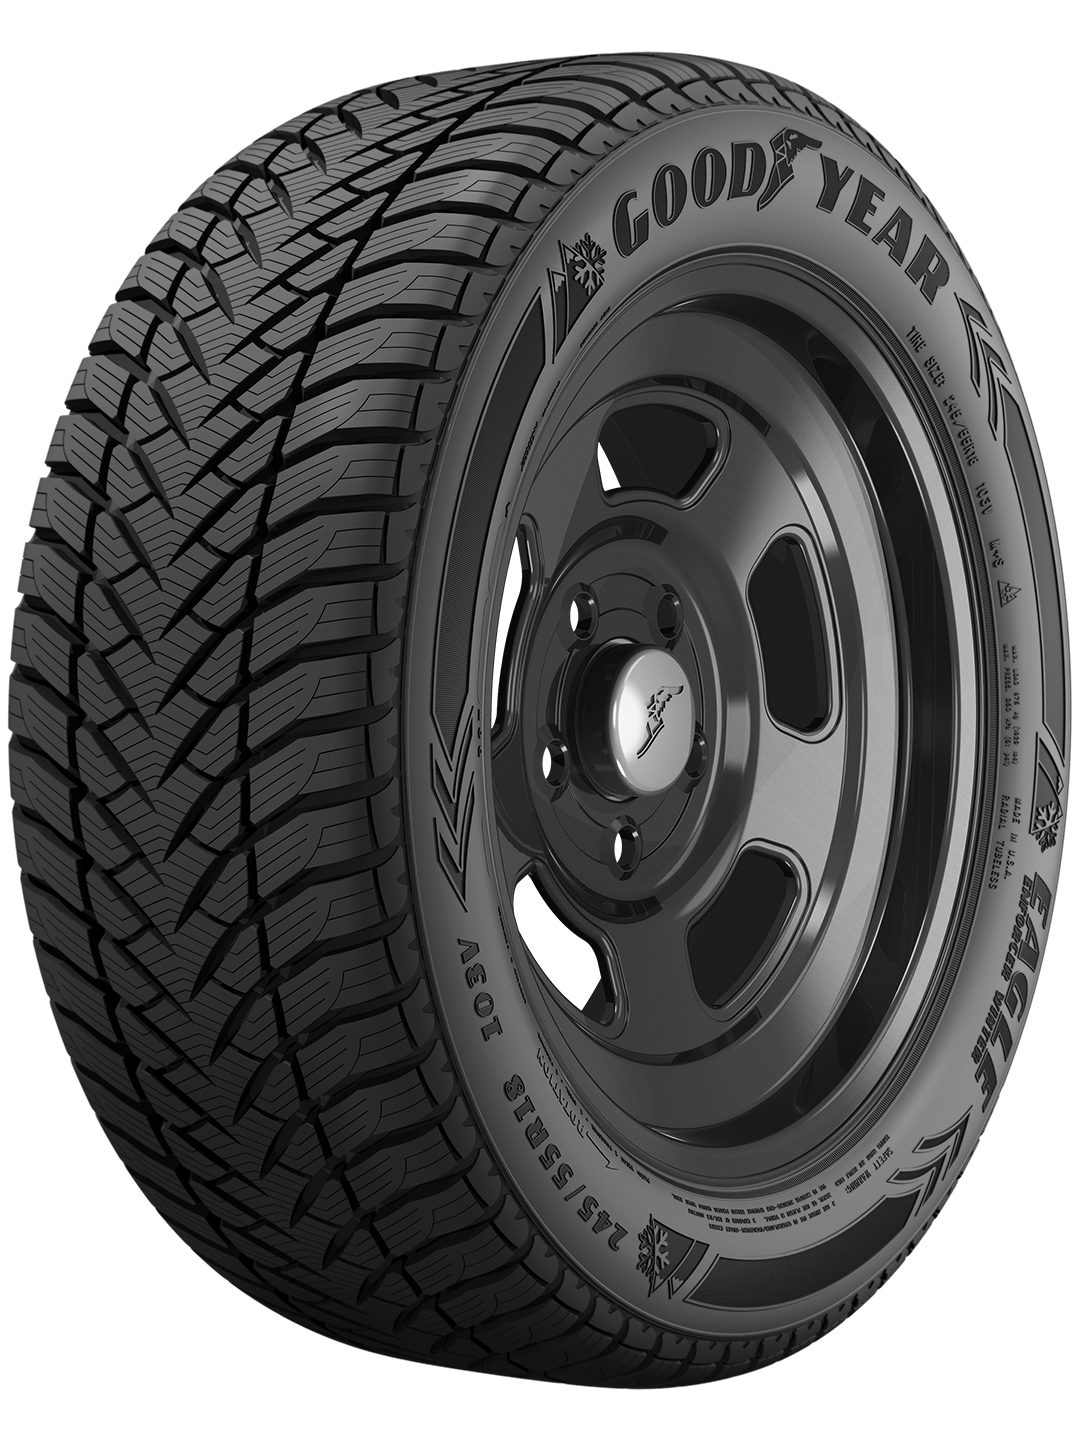 Police Tires | Goodyear Government Sales